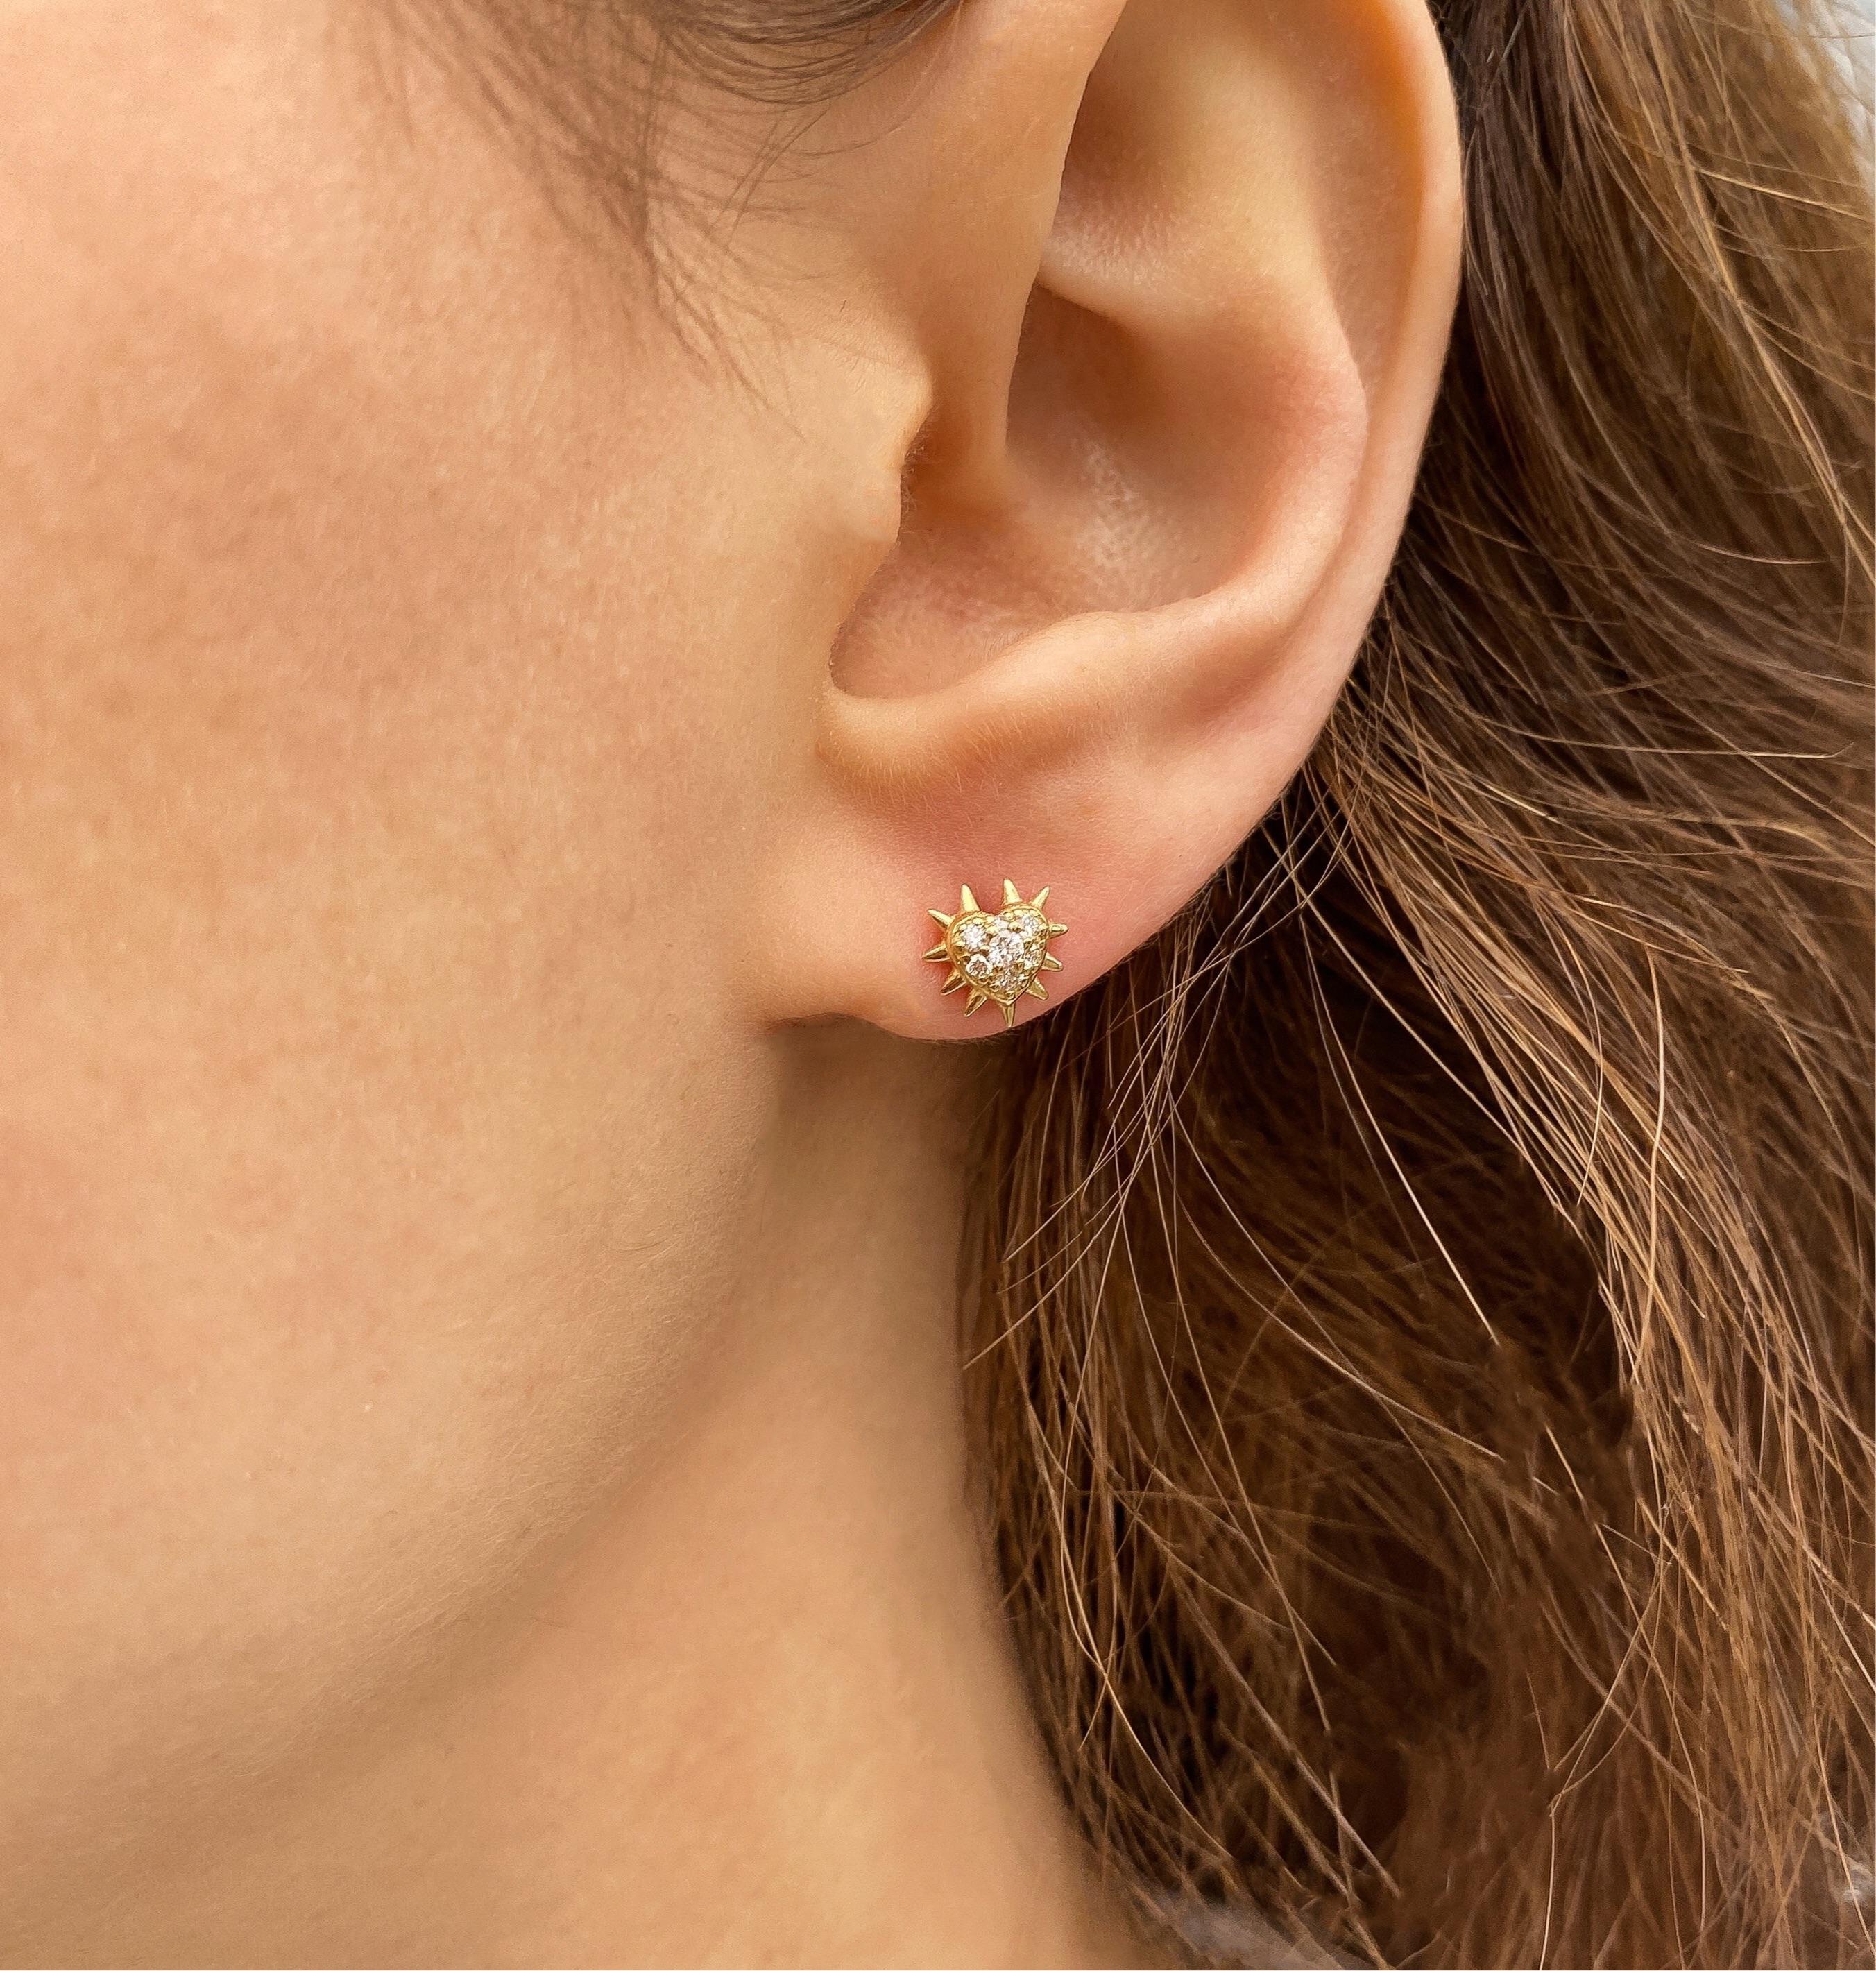 The ‘Thorny heart’ diamond studs are crafted in 18K gold hallmarked in Cyprus. These cute diamond heart studs, come in a highly polished finish and feature 0.15 Cts of White Diamonds. They will look equally impressive alone or layered and will most